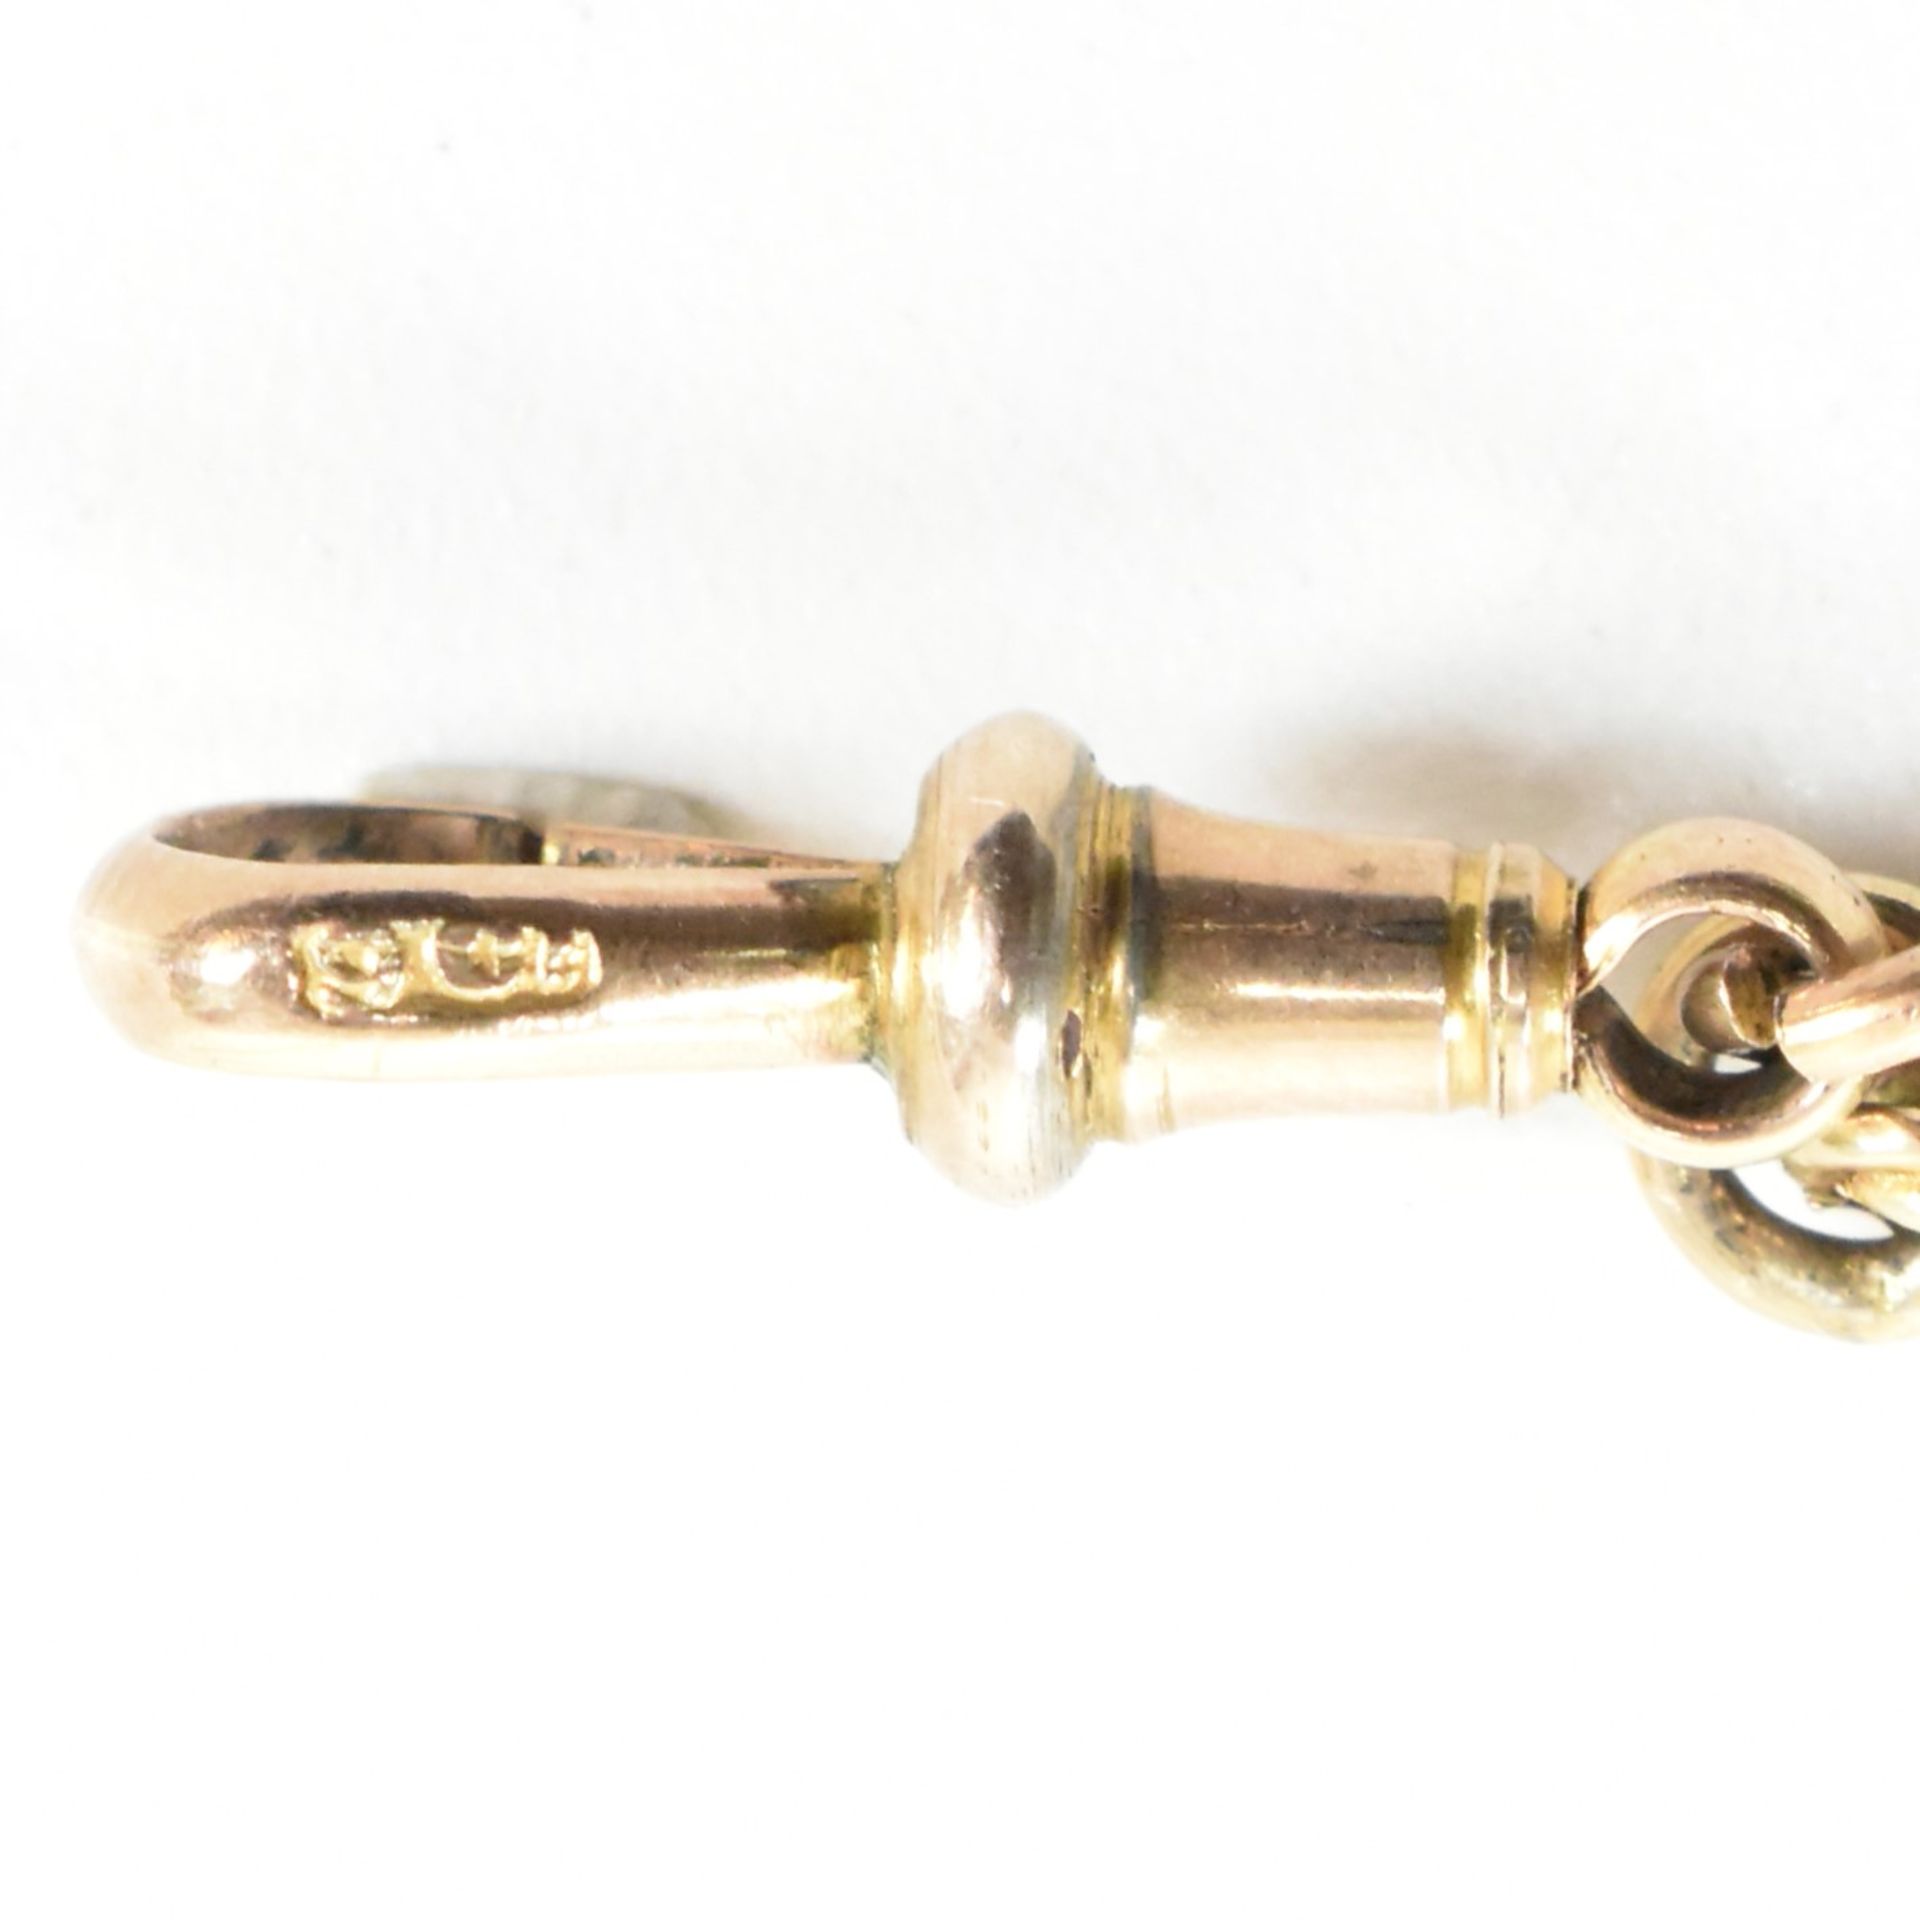 VICTORIAN 9CT GOLD LEONTINE WATCH CHAIN - Image 7 of 7